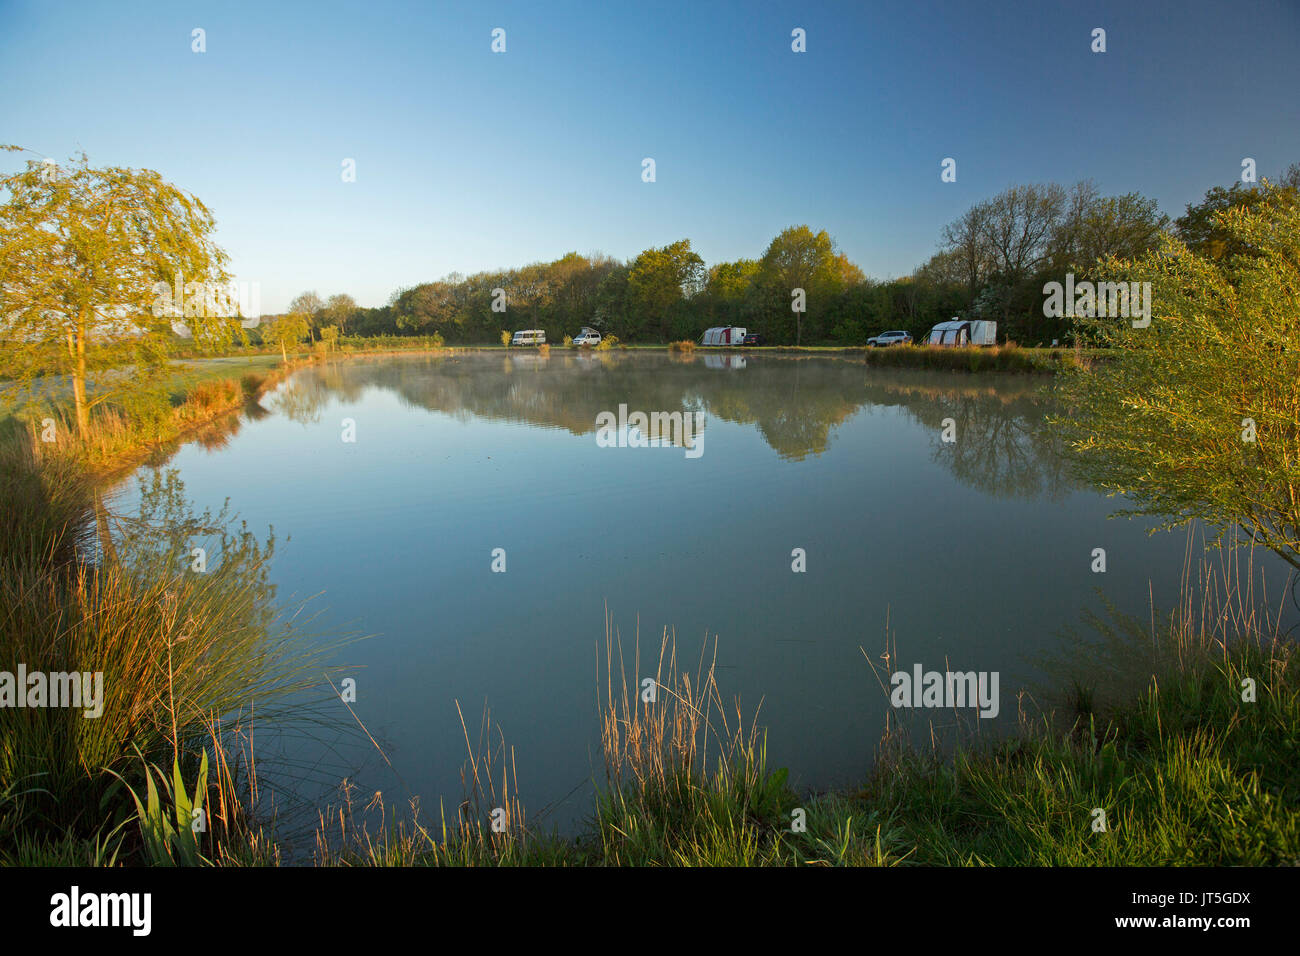 Caravans and campervan beside trees in rural landscape reflected in calm blue water of coarse fishing pond under blue sky in England Stock Photo